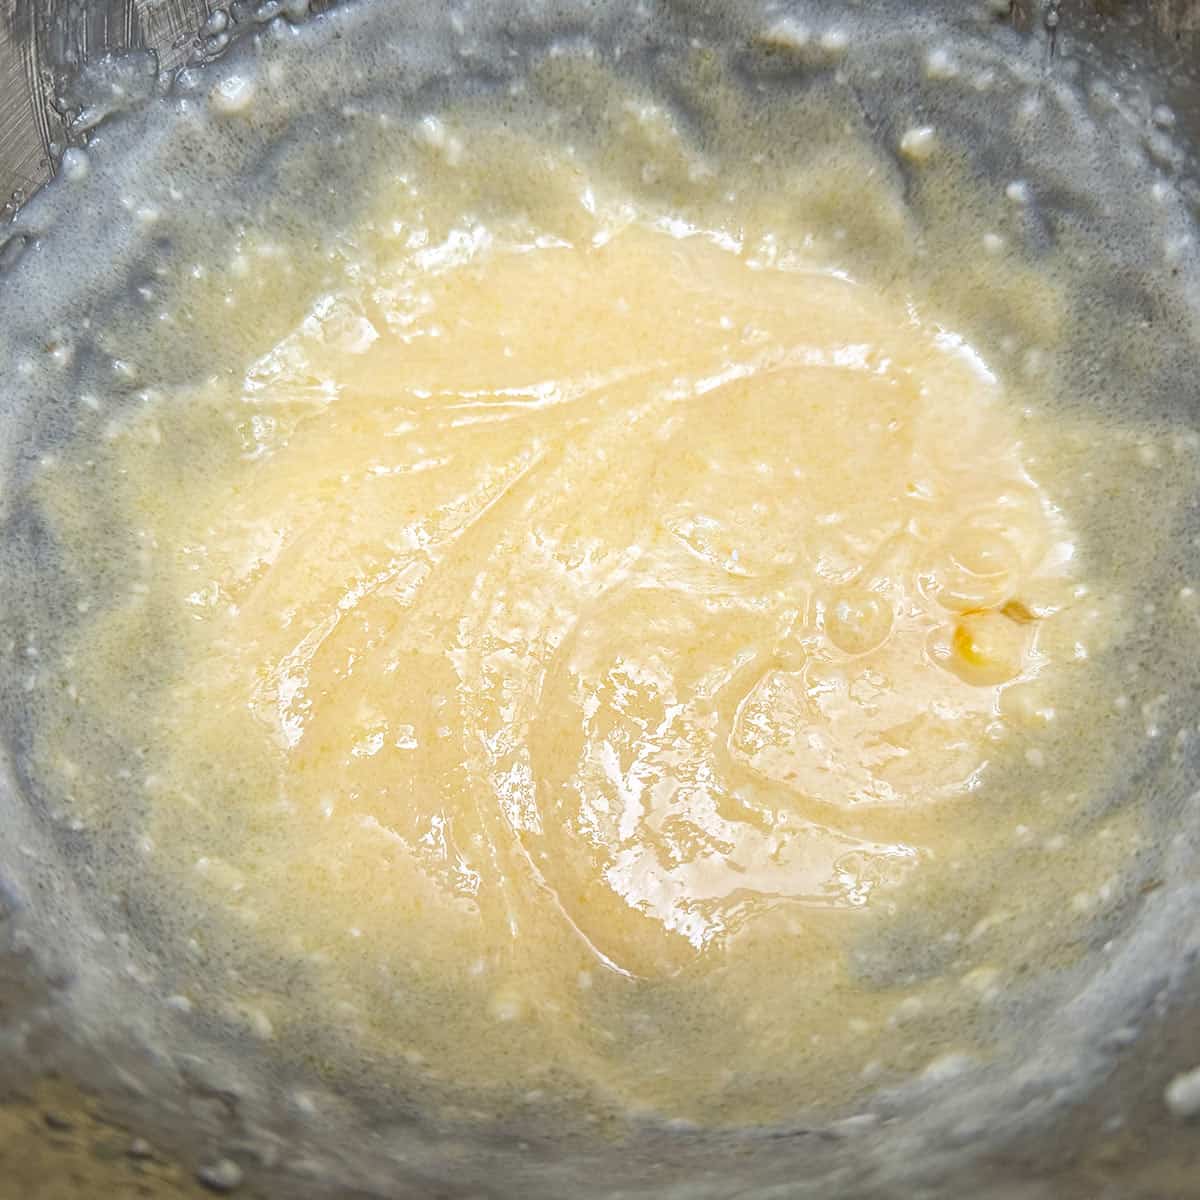 Vanilla extract and egg are added to the butter and oil.